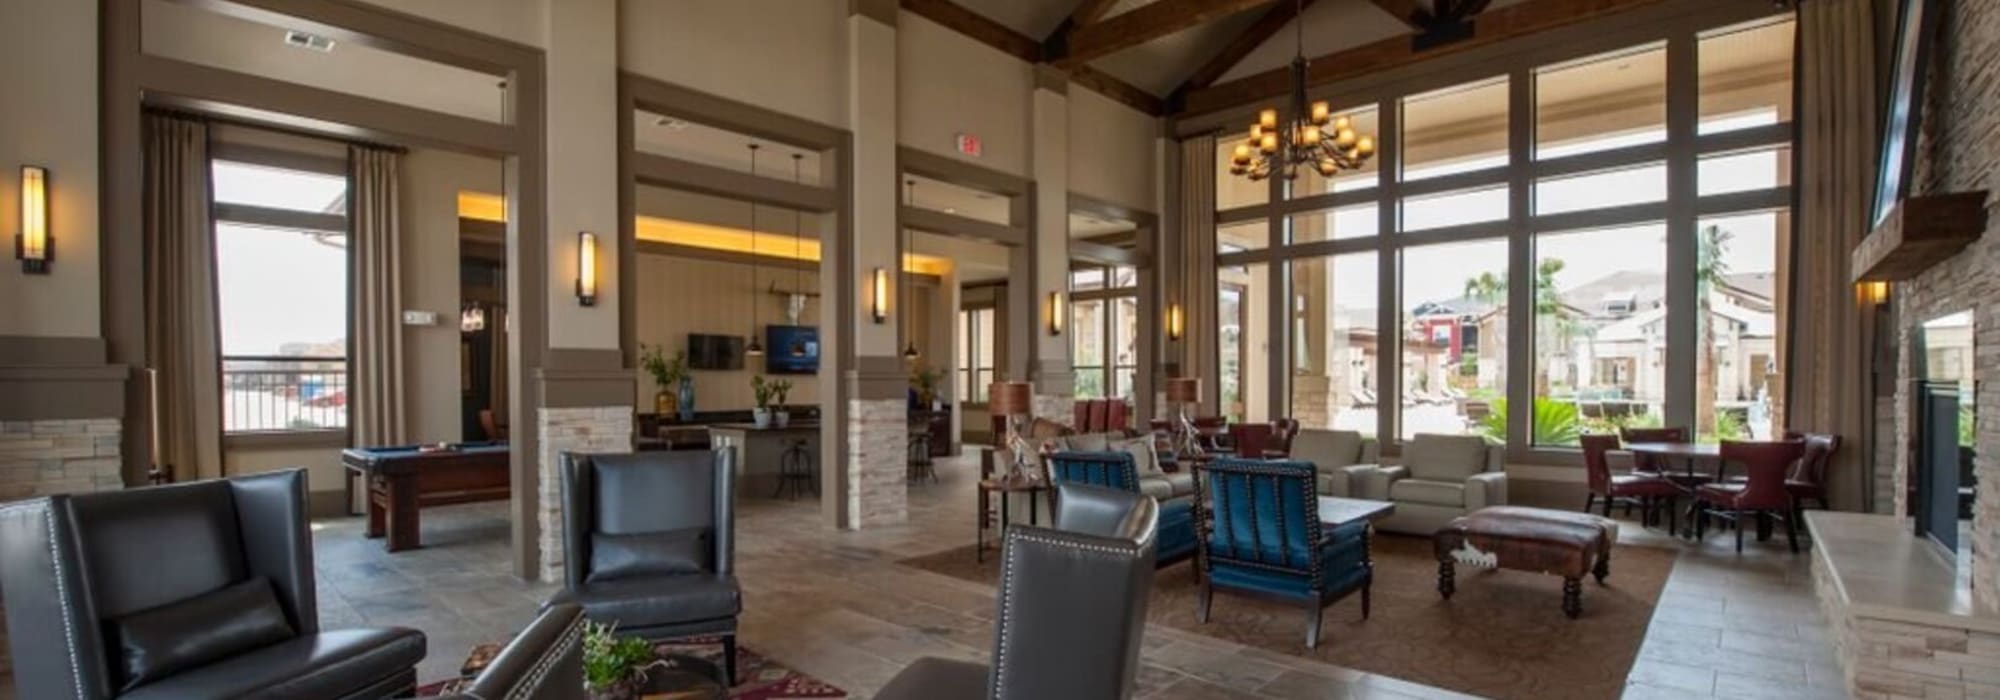 community clubhouse with huge windows looking out to the pool at The Crossing at Katy Ranch in Katy, Texas